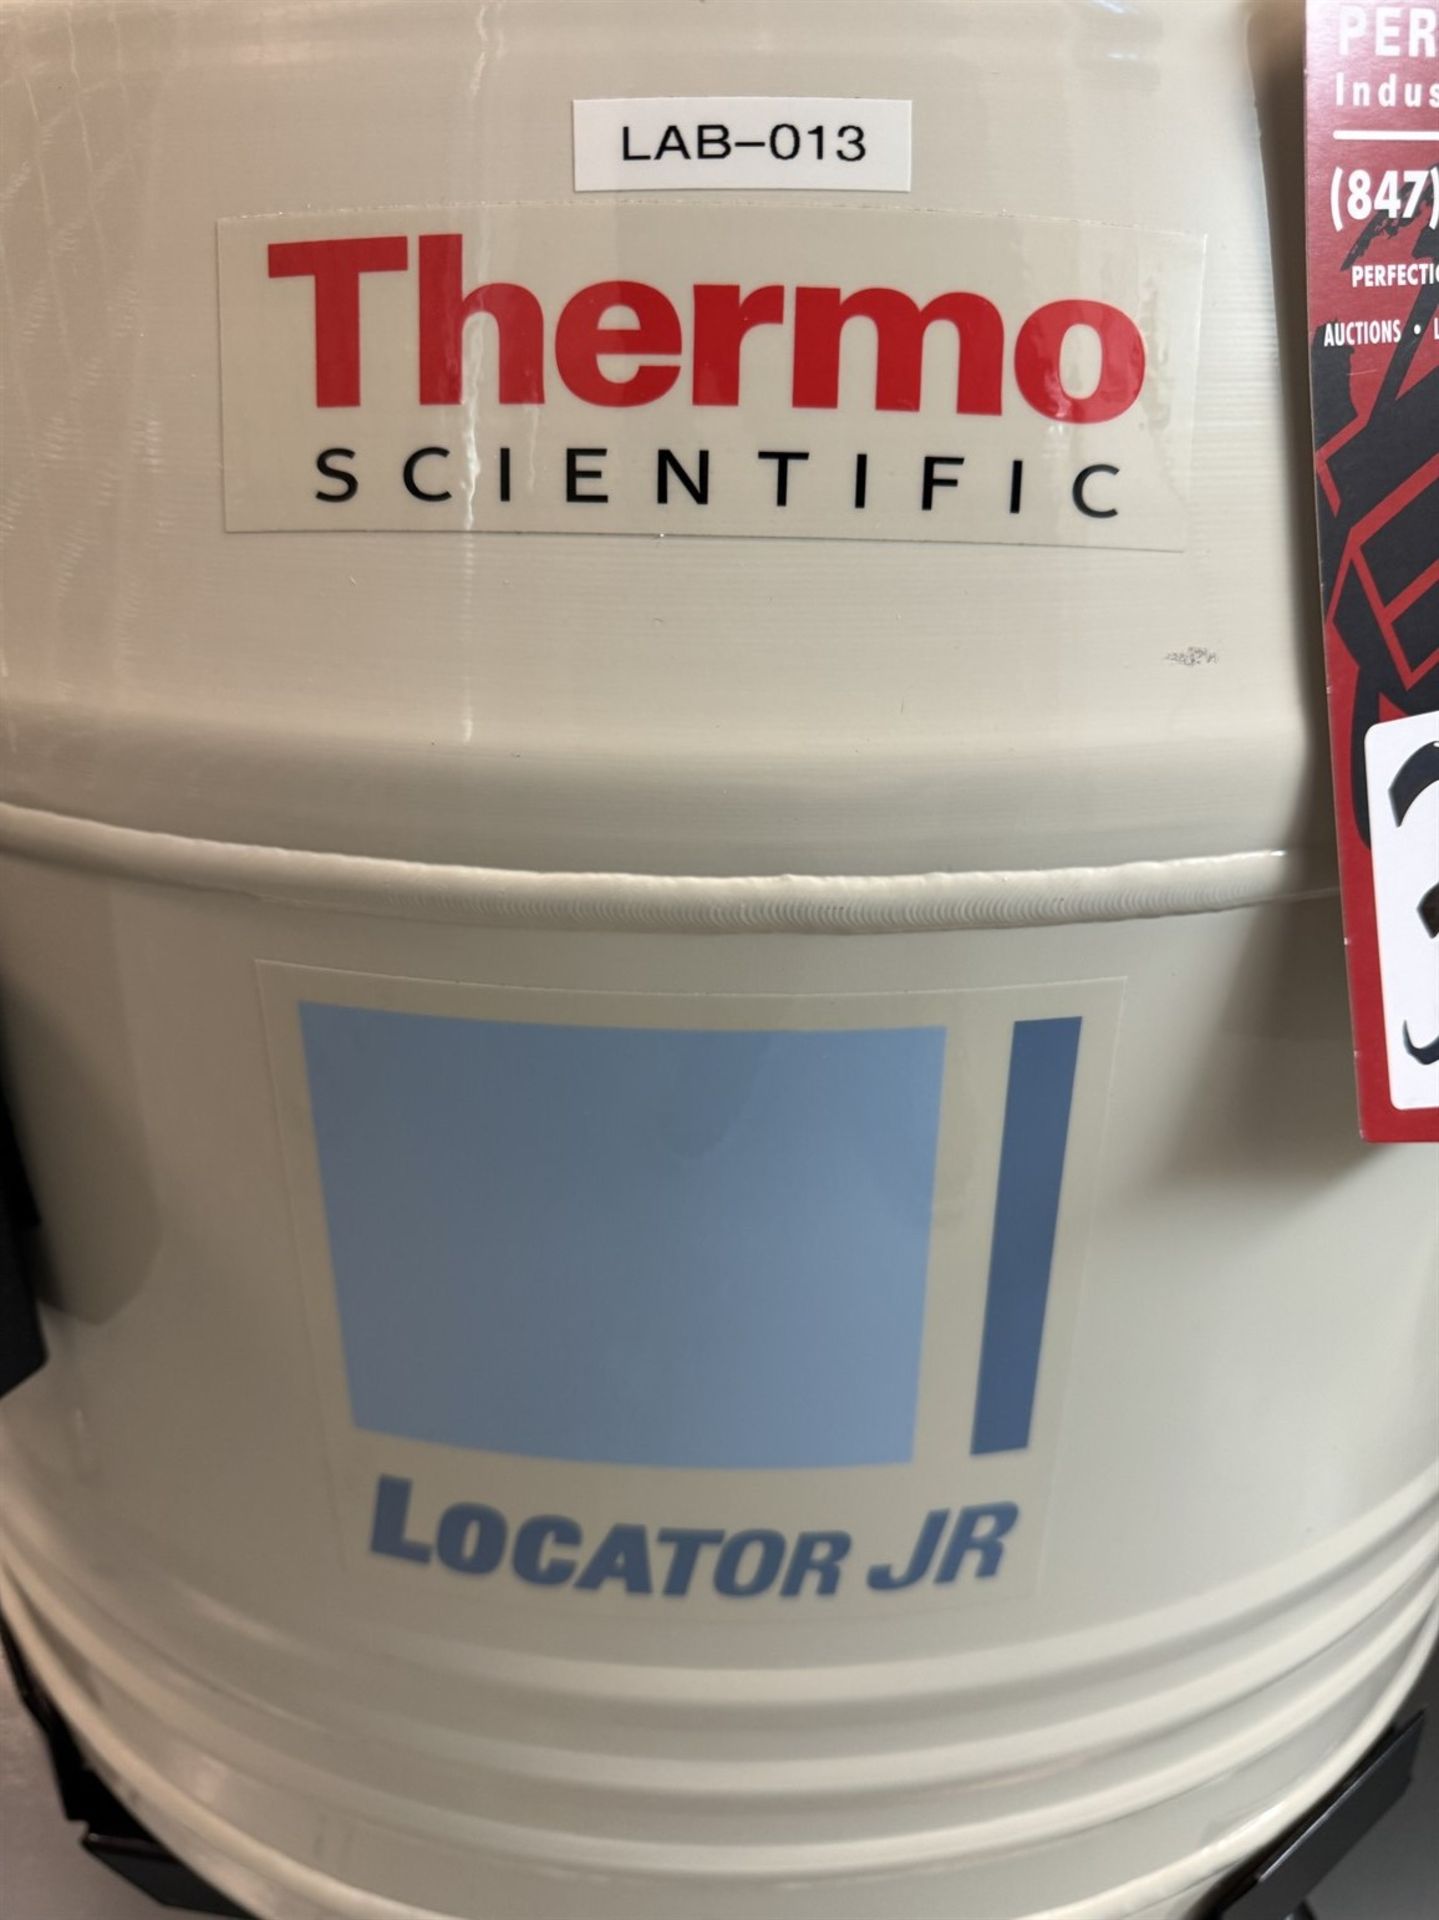 THERMO SCIENTIFIC 8201 Locator JR Cryopreservation Tank, s/n 573232-102 - Image 2 of 7